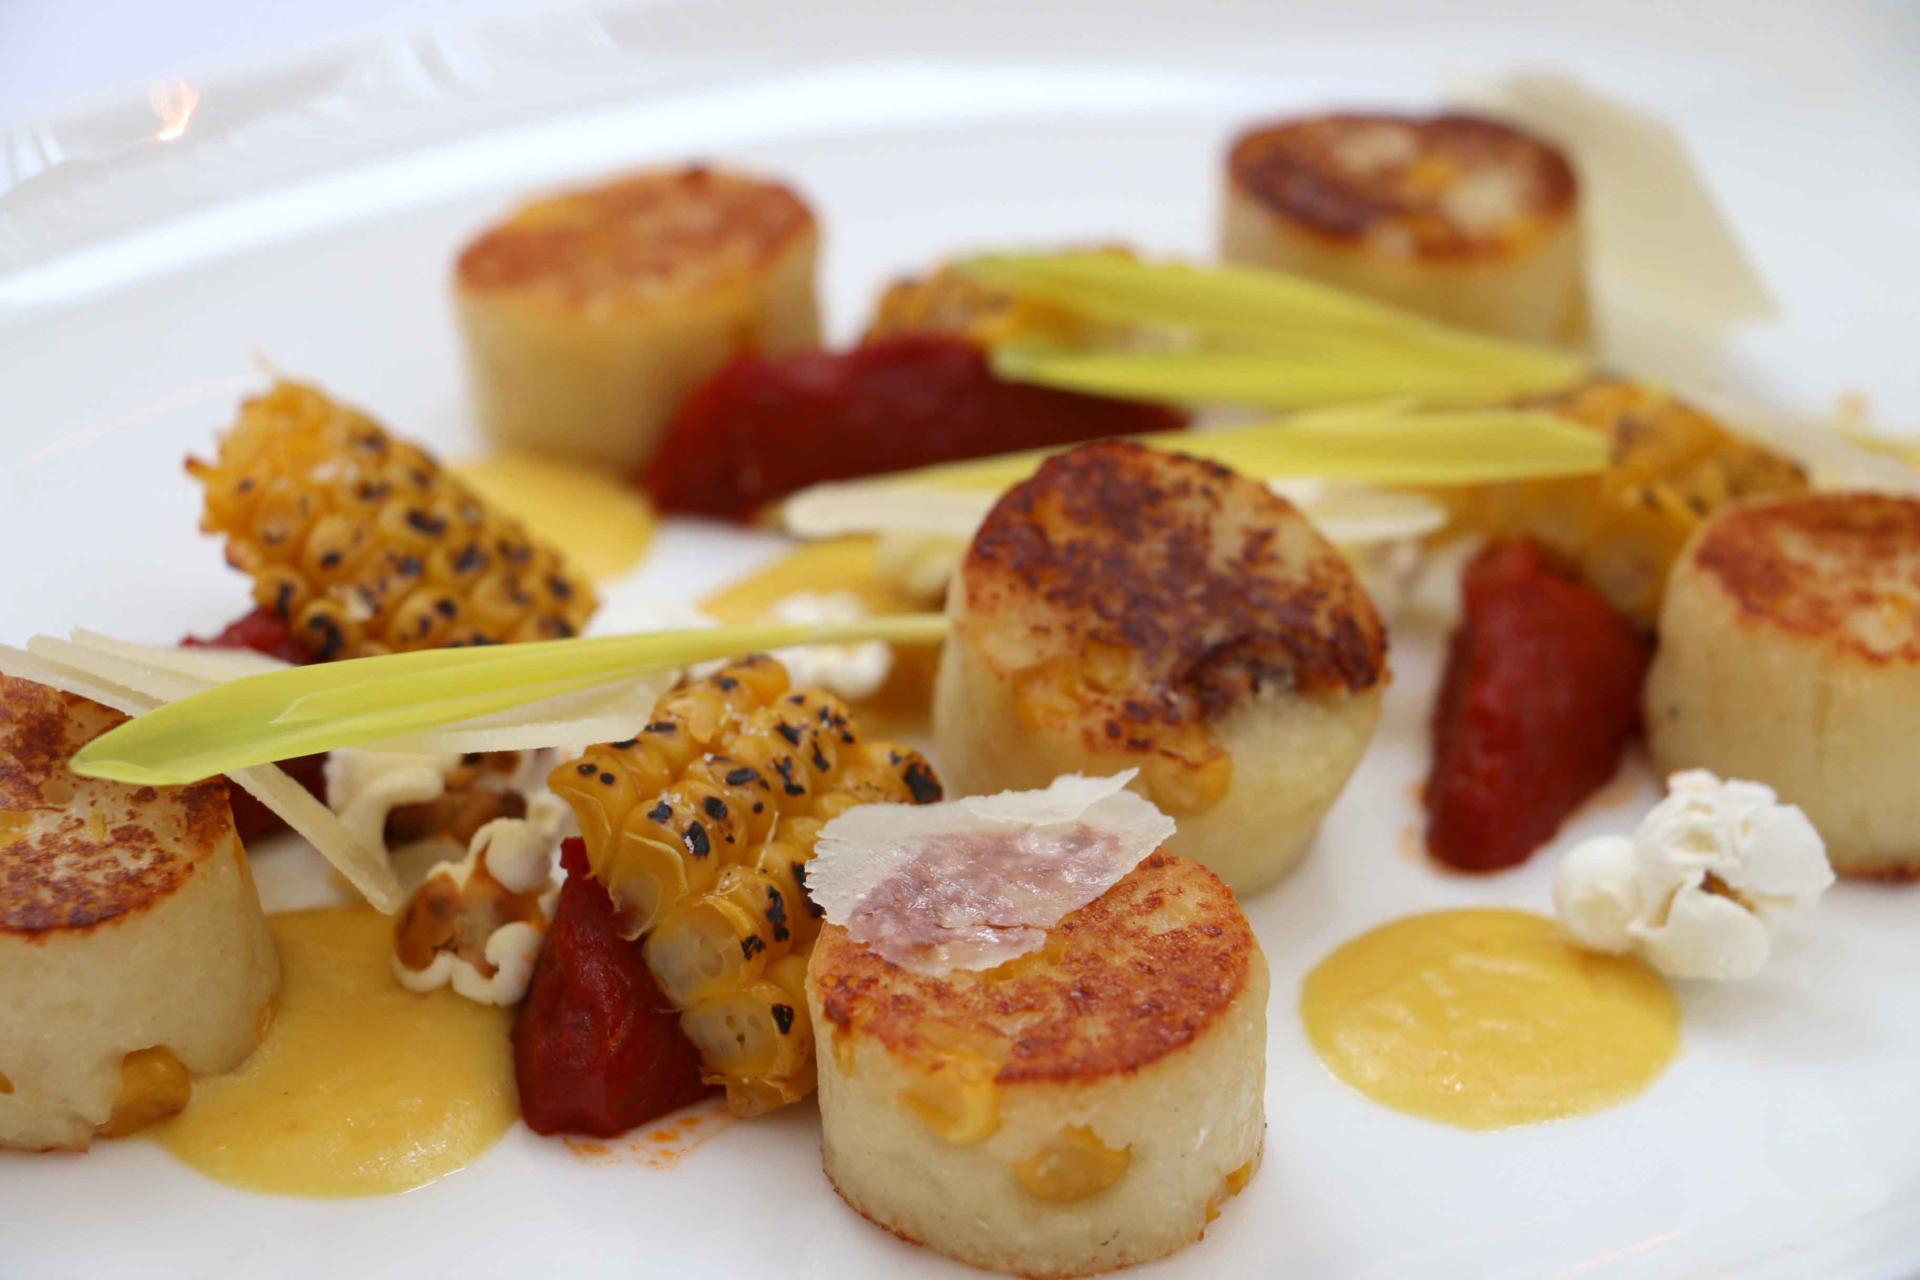 Sopwell House Restaurant Review: A Relaxed Sunday Lunch in The Restaurant at Sopwell House